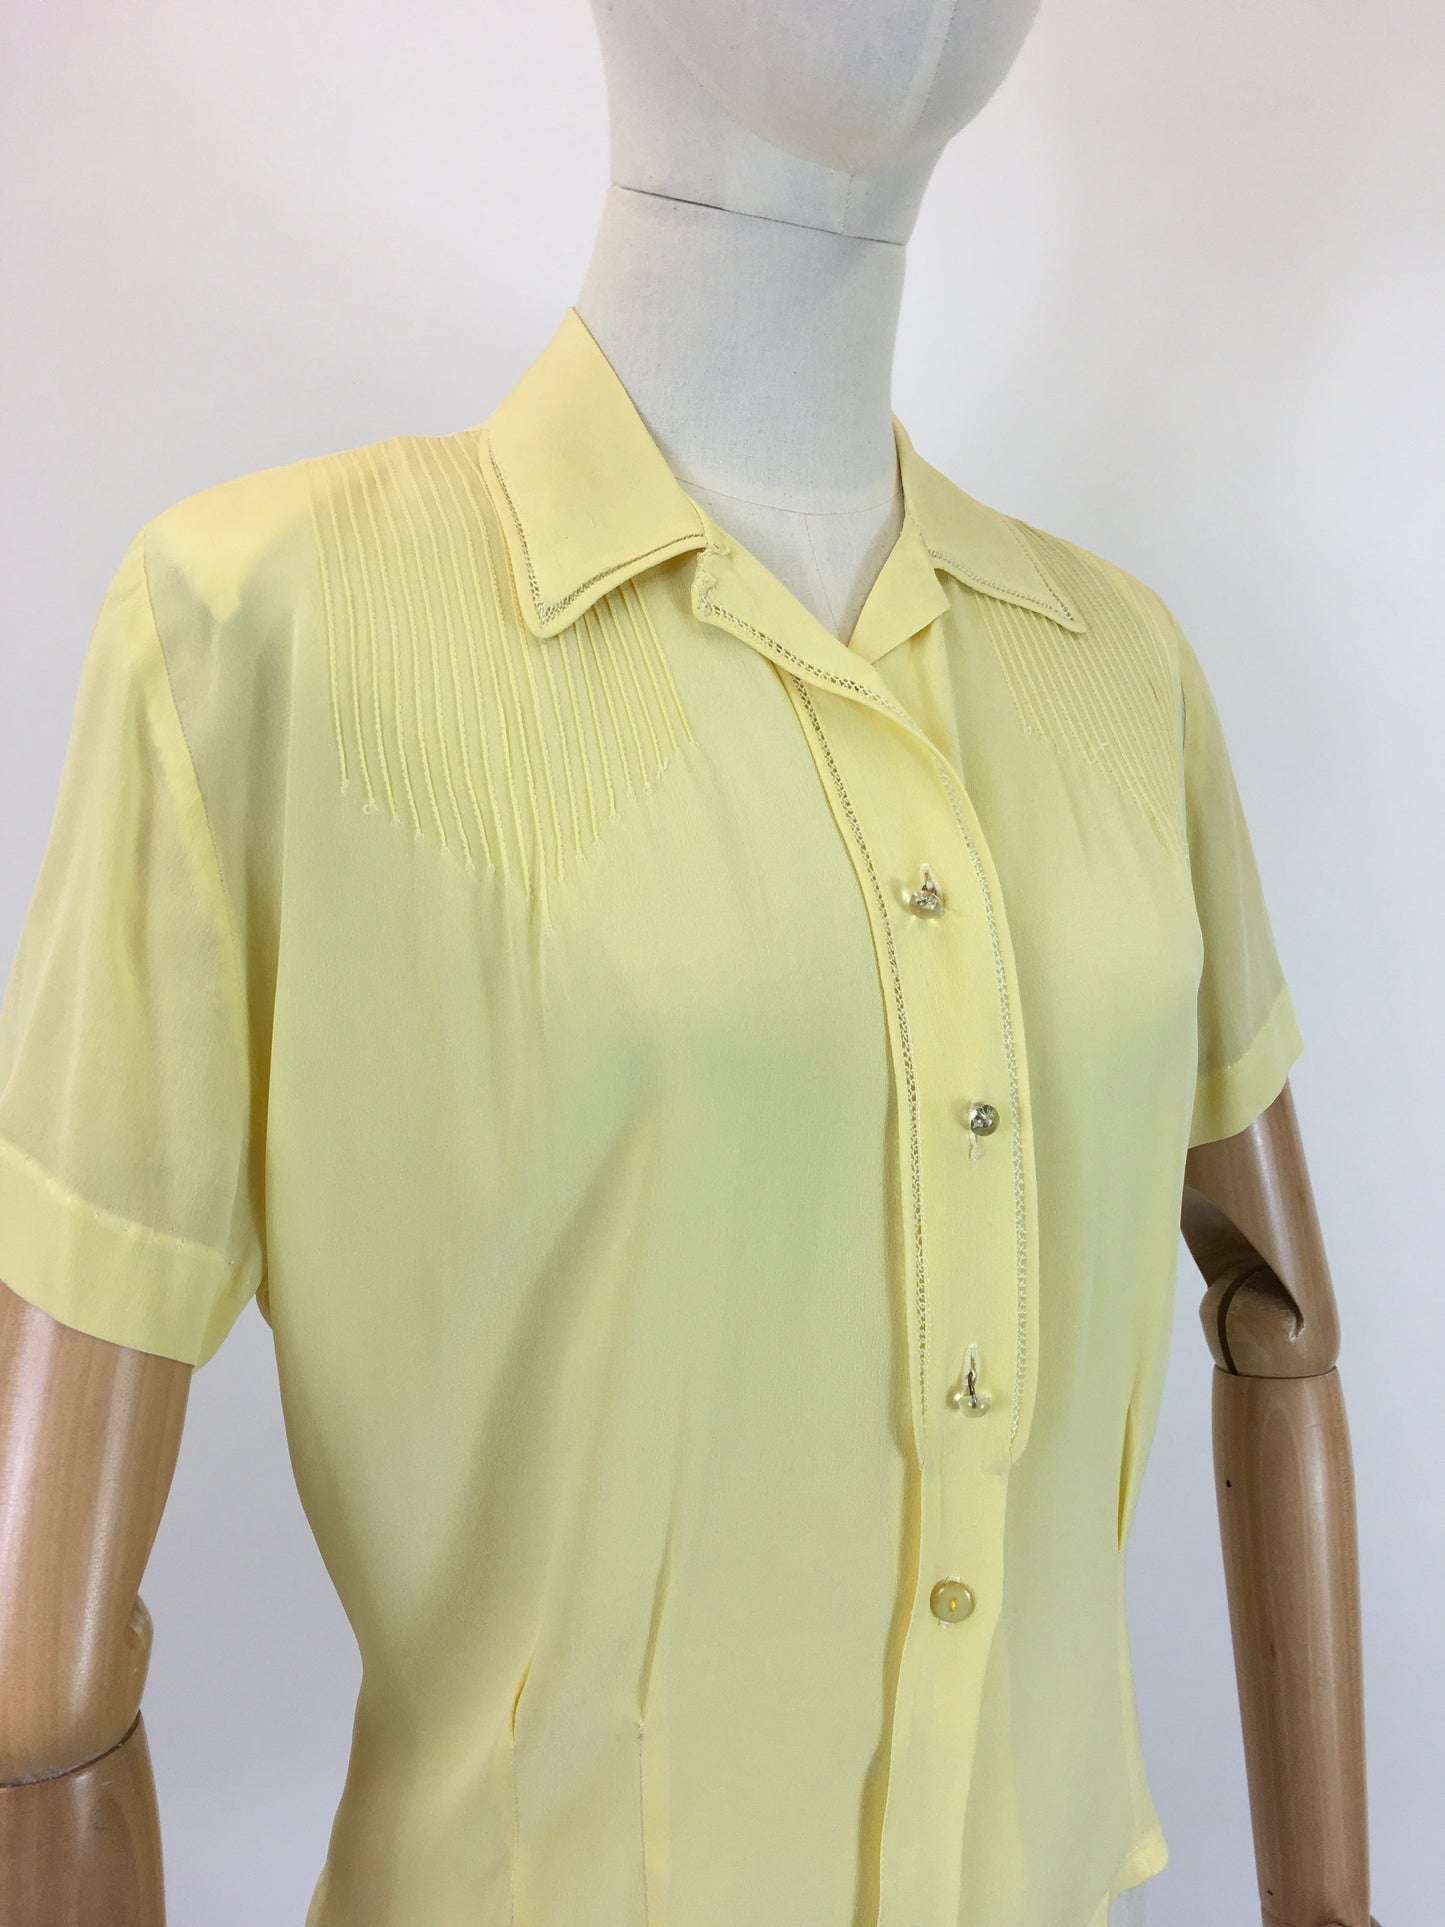 Original 1940’s Sheer Blouse In A Sunshine Yellow - With Stunning Stitch Work Detailing